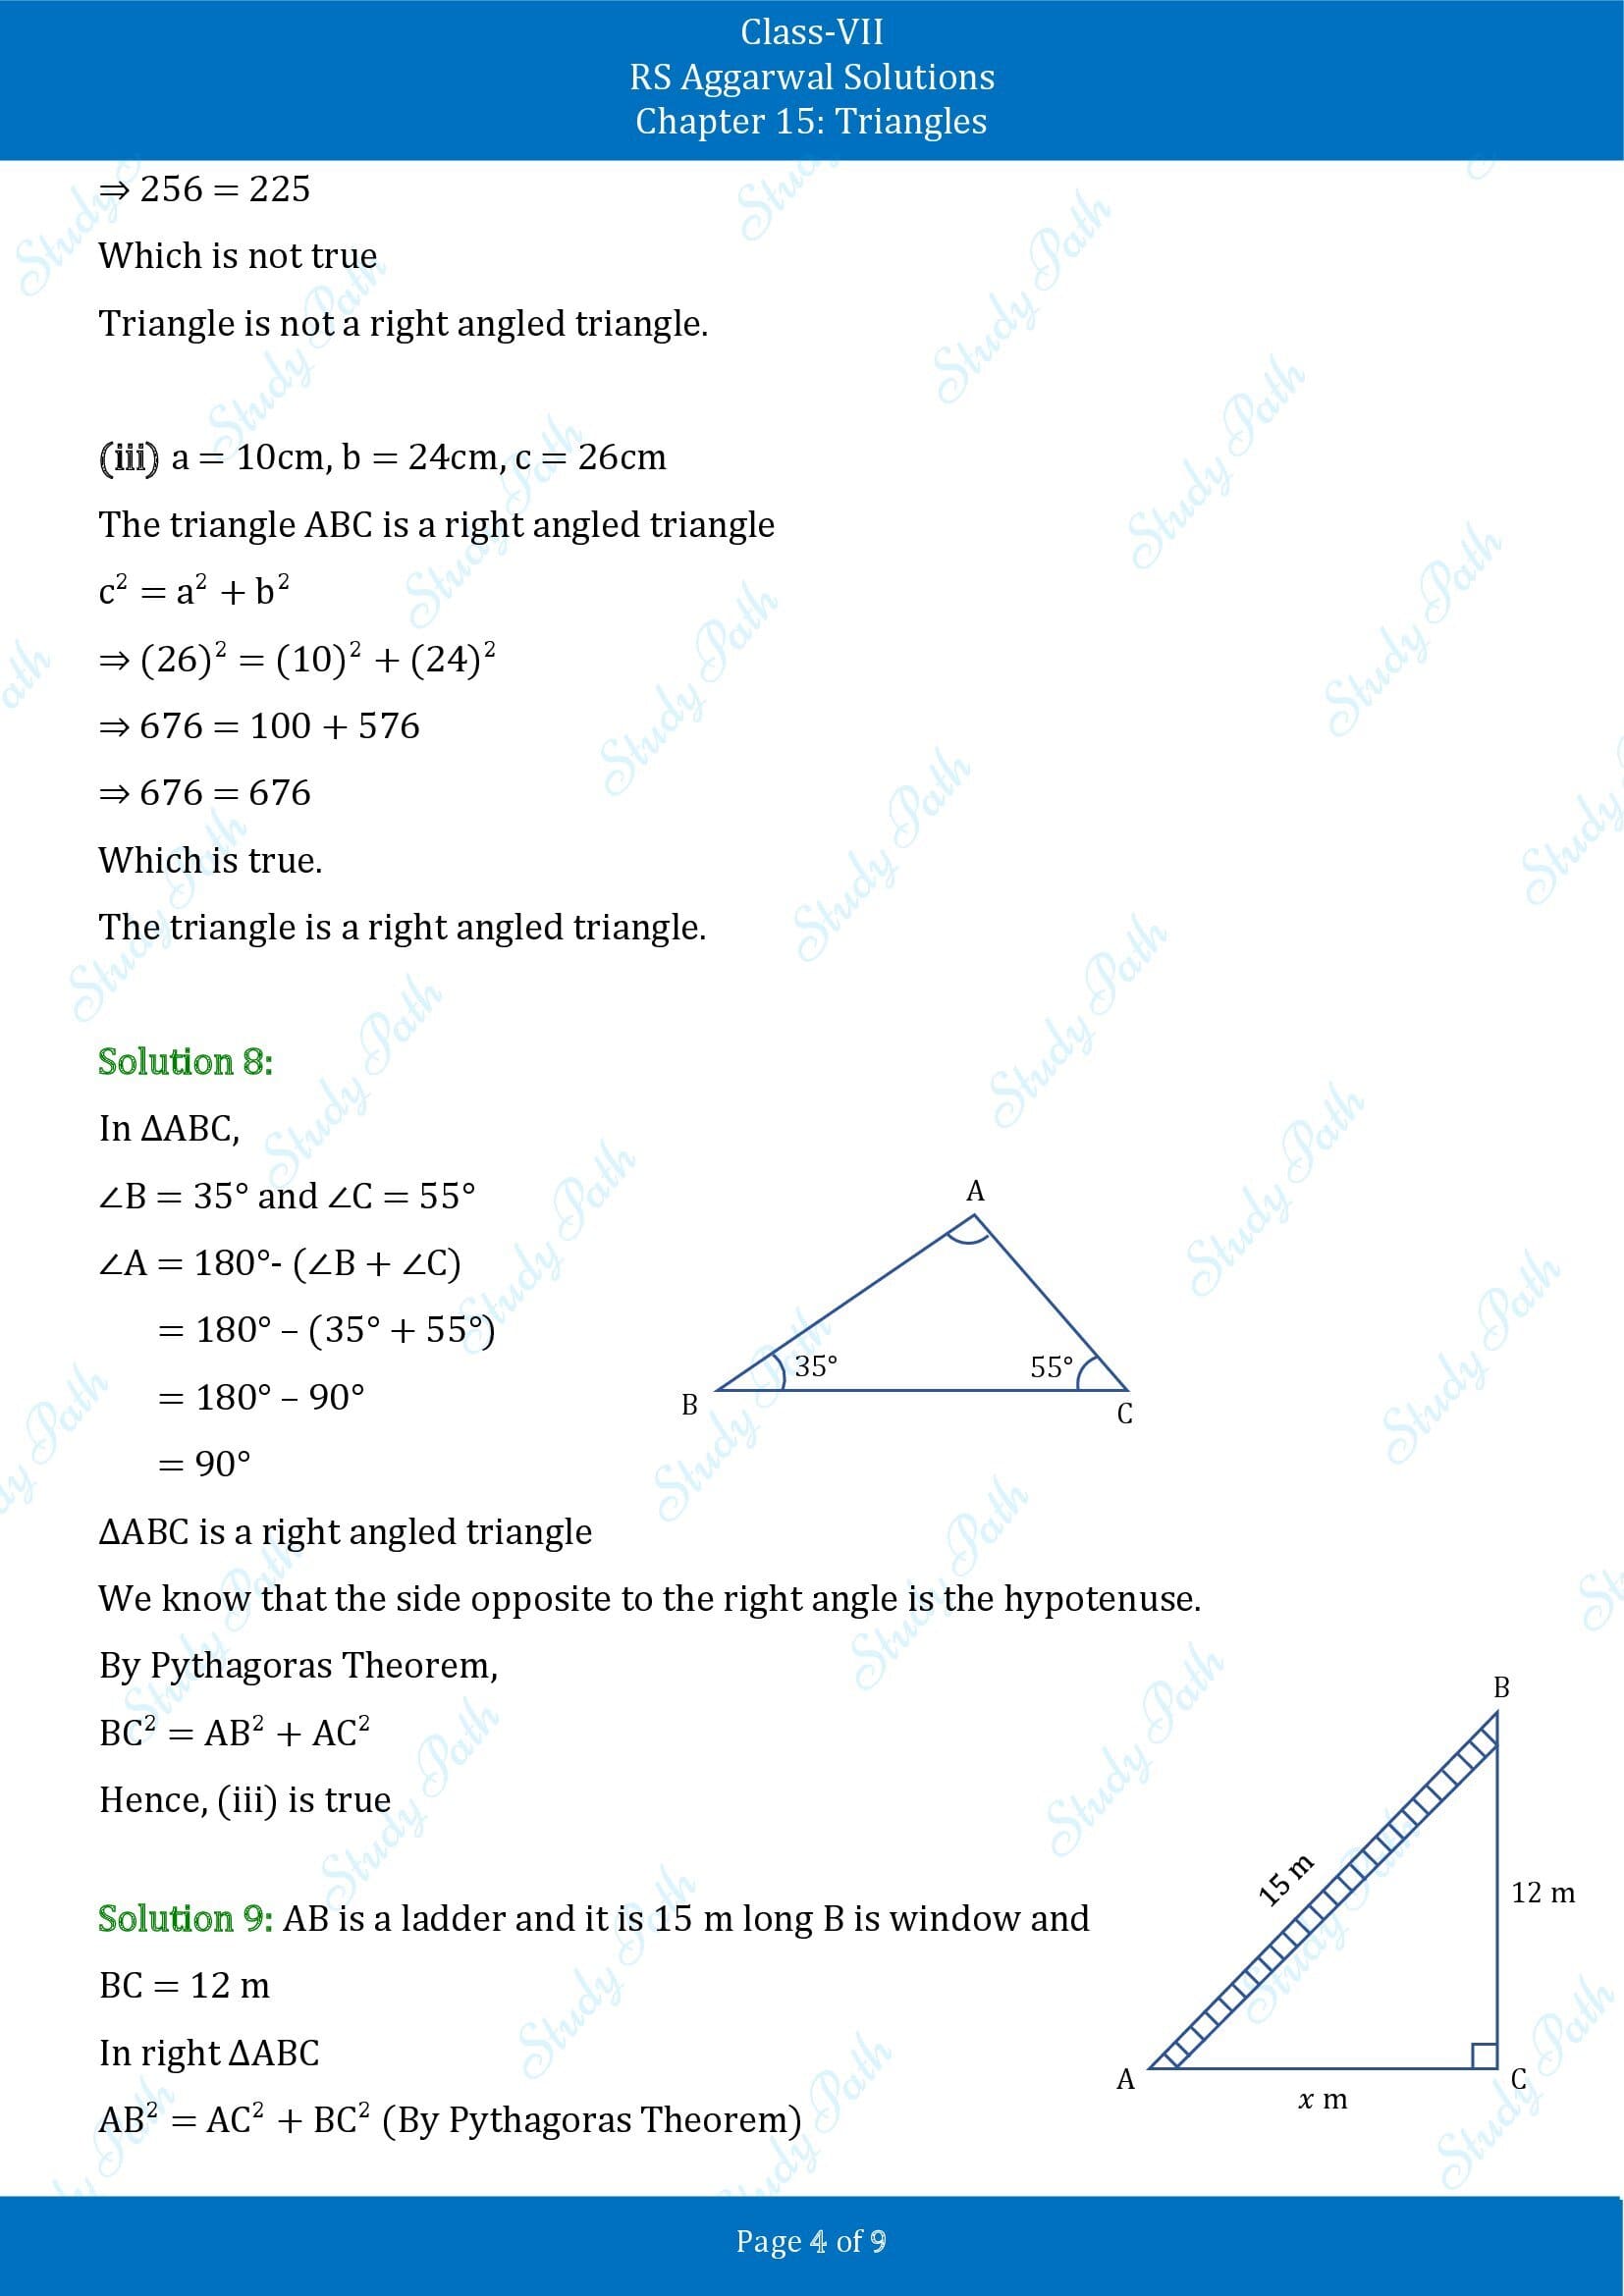 RS Aggarwal Solutions Class 7 Chapter 15 Triangles Exercise 15D 00004